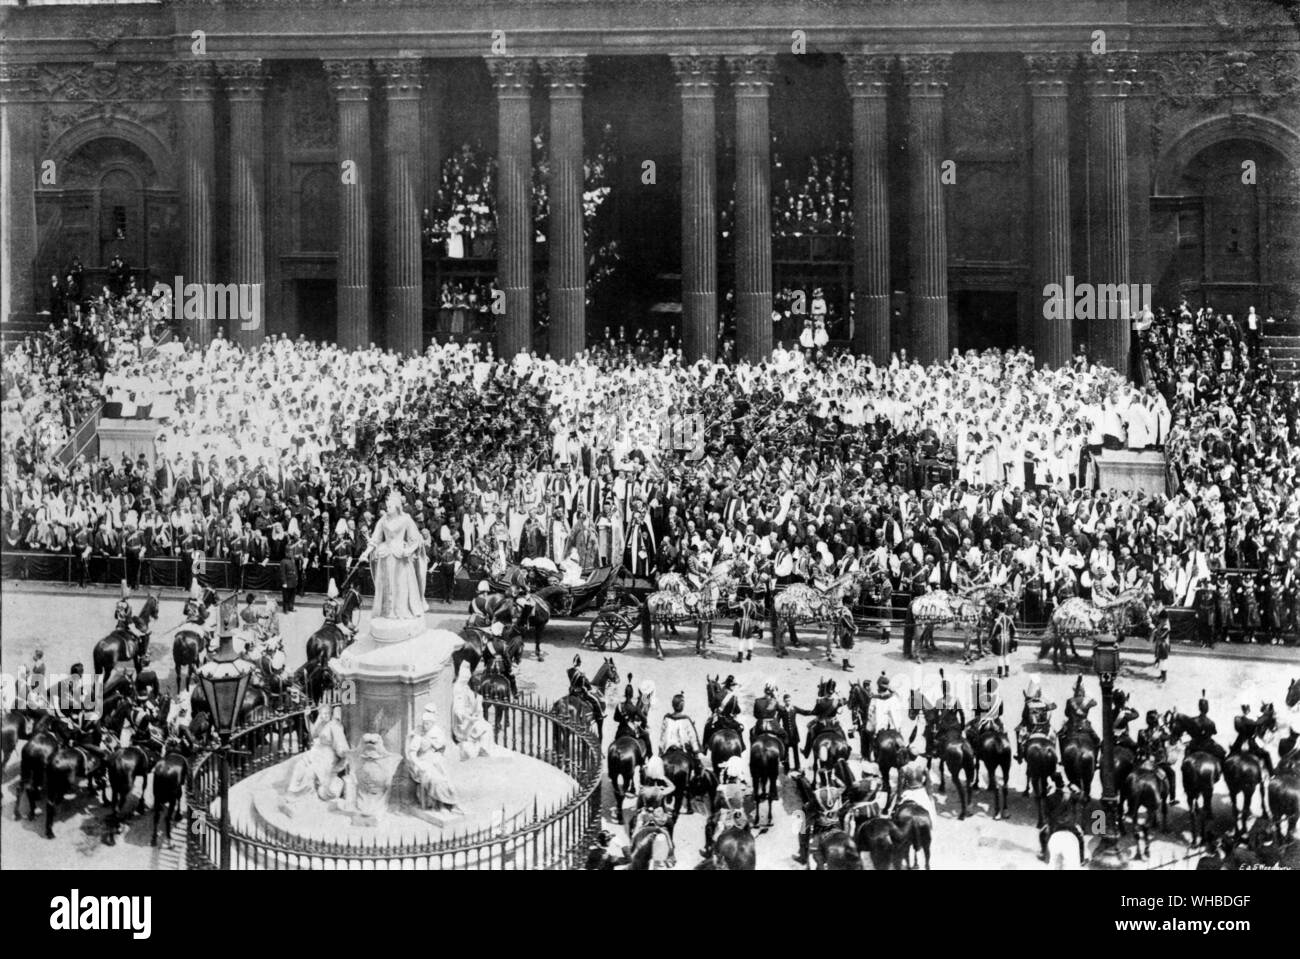 Queen Victoria - Diamond Jubilee - The ceremony at St. Paul's from a souvenir publication Sixty Years A Queen.. Victoria (Alexandrina Victoria. 24 May 1819 - 22 January 1901) was the Queen of the United Kingdom of Great Britain and Ireland from 20 June 1837, and the first Empress of India from 1 May 1876, until her death on 22 January 1901. Her reign lasted 63 years and seven months, longer than that of any other British monarch. The Colonial Secretary, Joseph Chamberlain, proposed that the Diamond Jubilee be made a festival of the British Empire. The Prime Ministers of all the self-governing Stock Photo